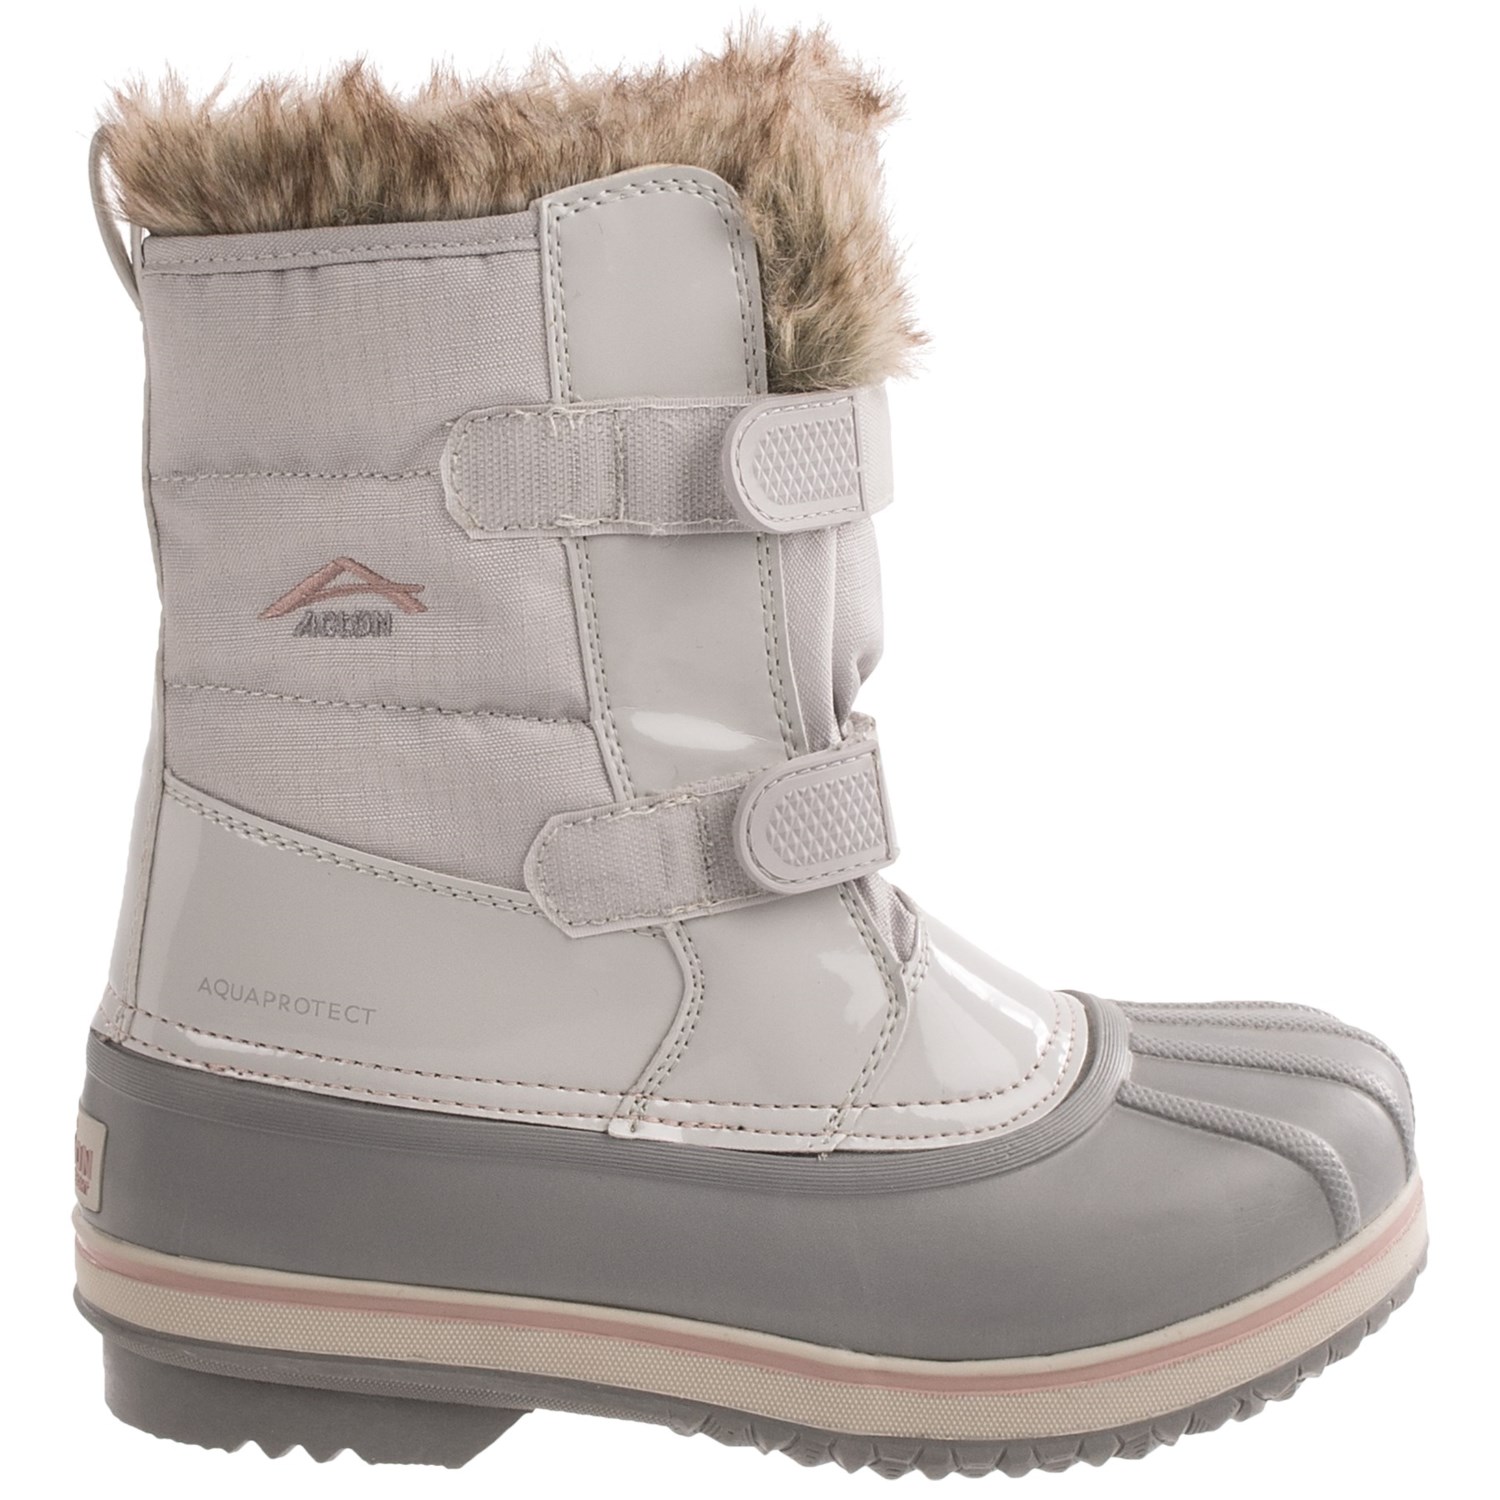 Acton Chill Snow Boots (For Kids and Youth) 7517A - Save 74%